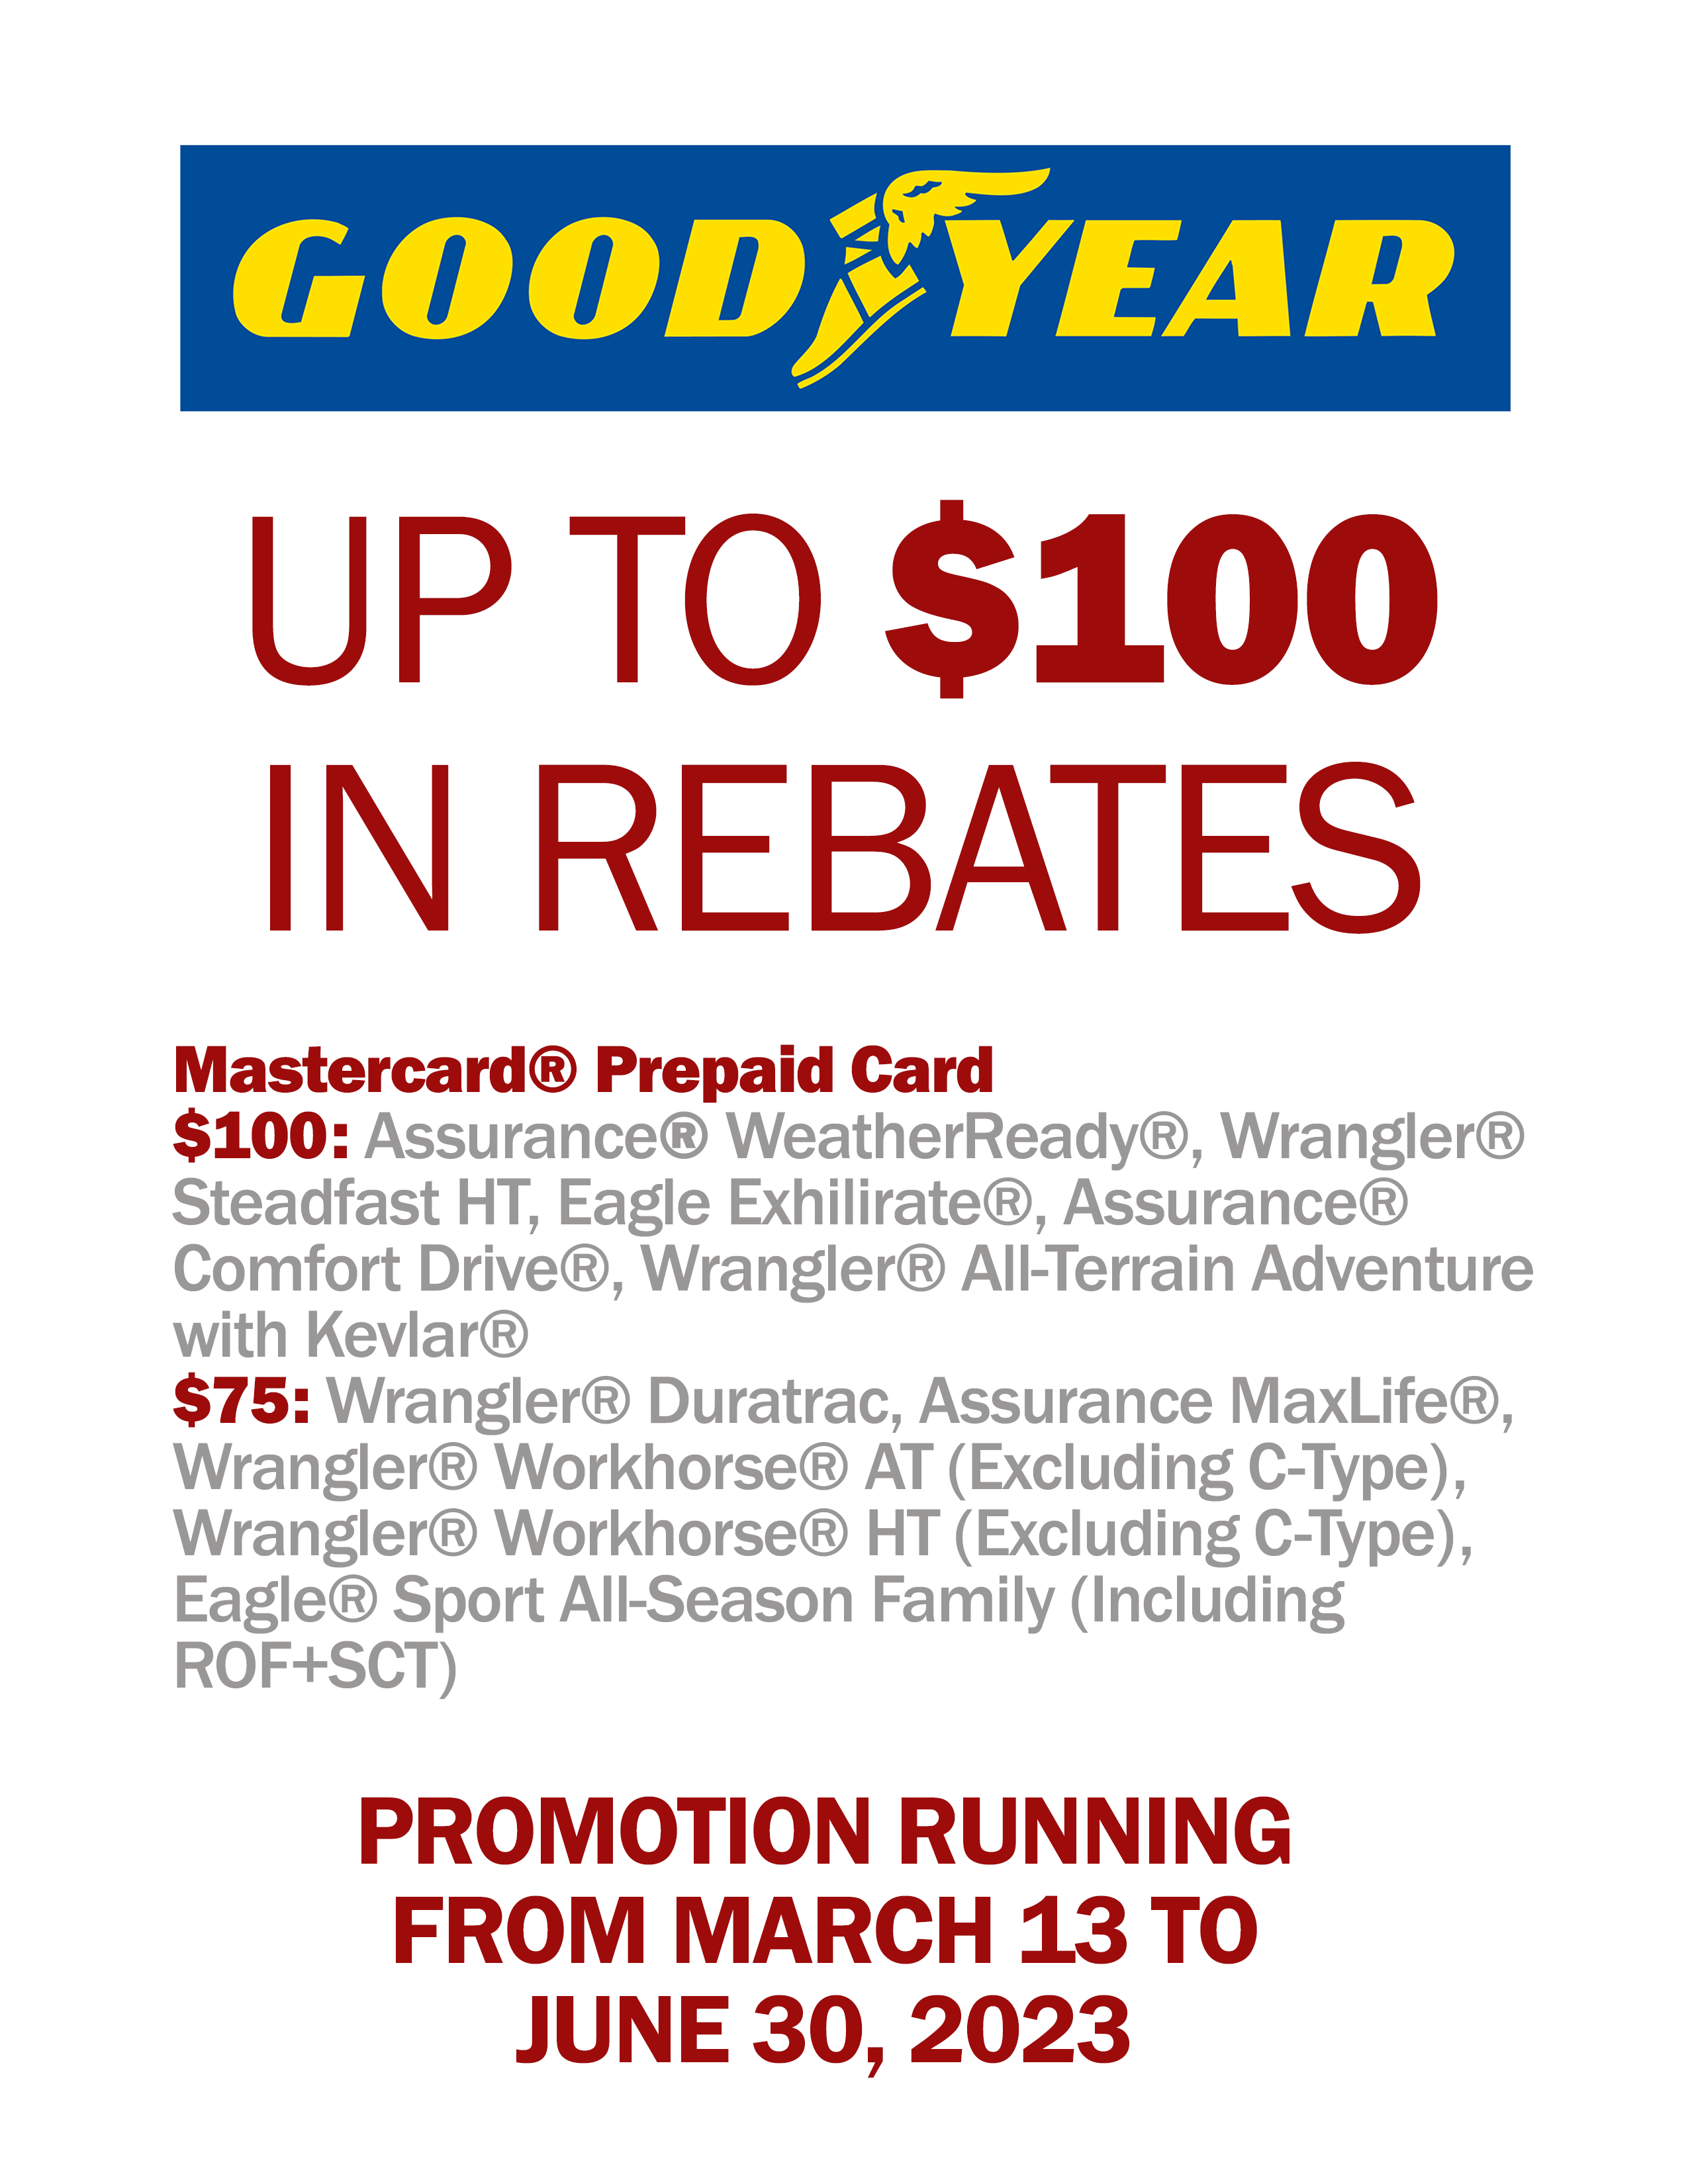 goodyear-spring-2023-rebate-downtown-auto-specialist